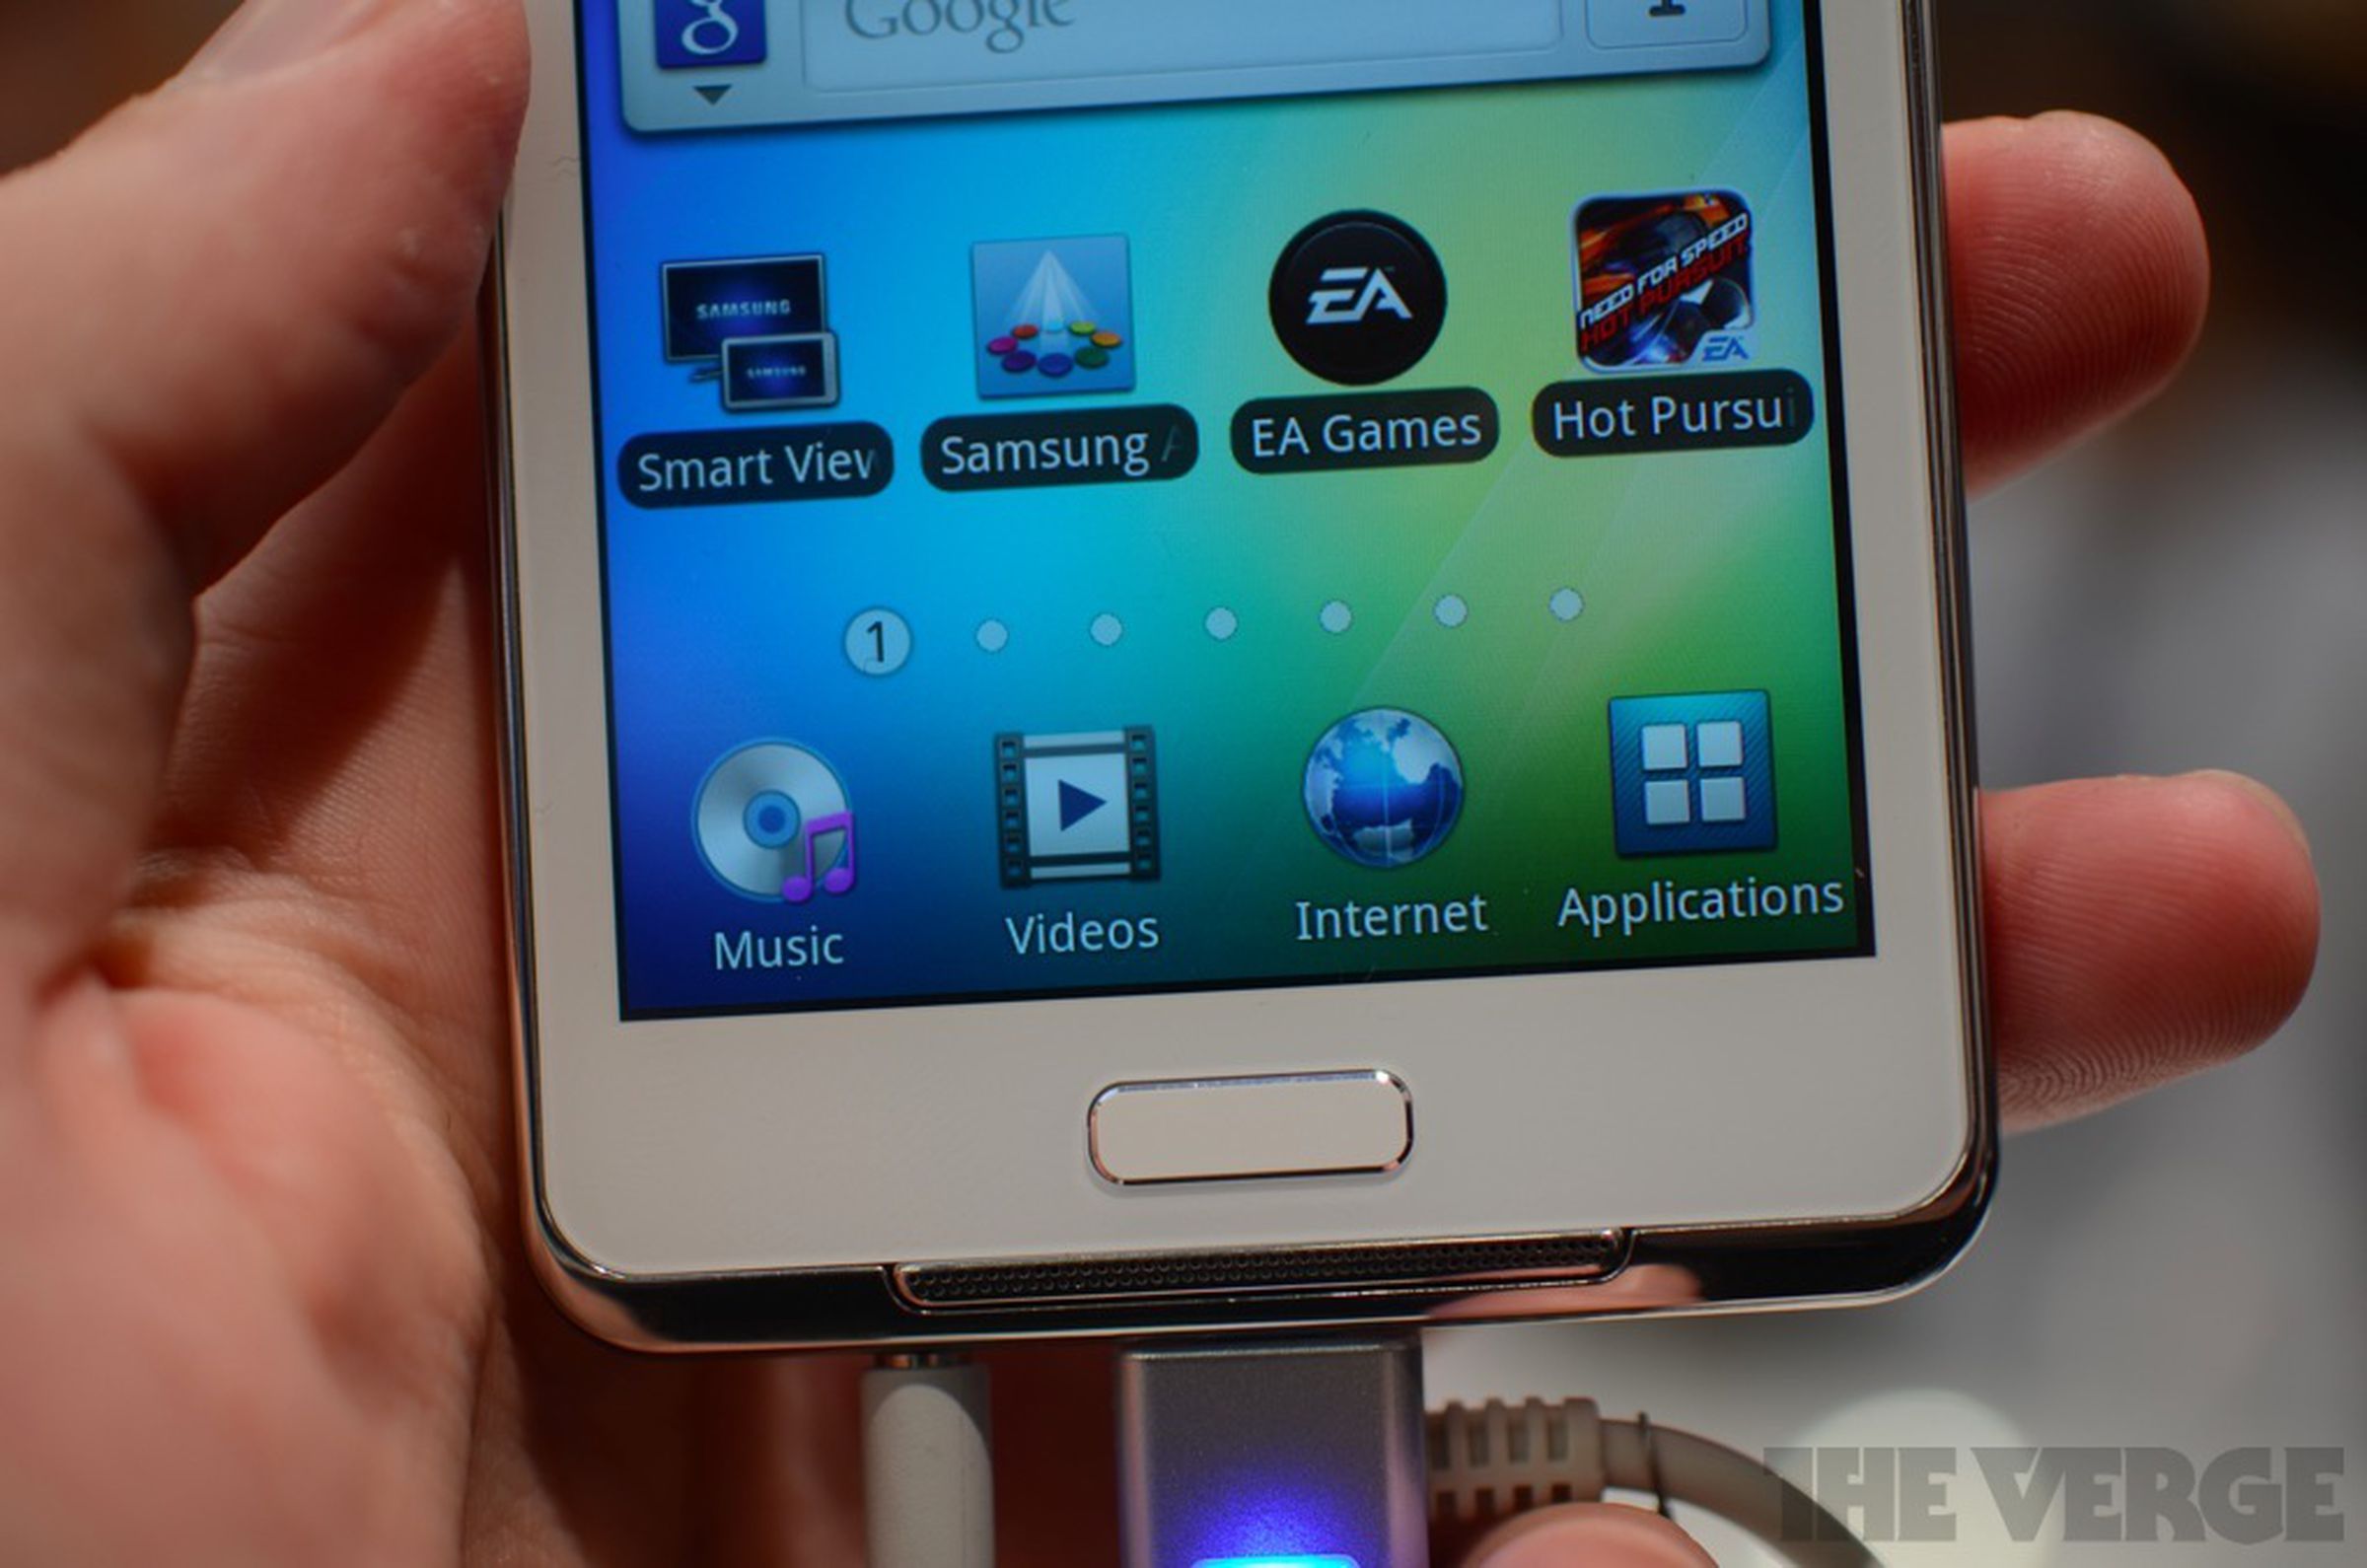 Samsung Galaxy S WiFi 4.2 hands-on pictures